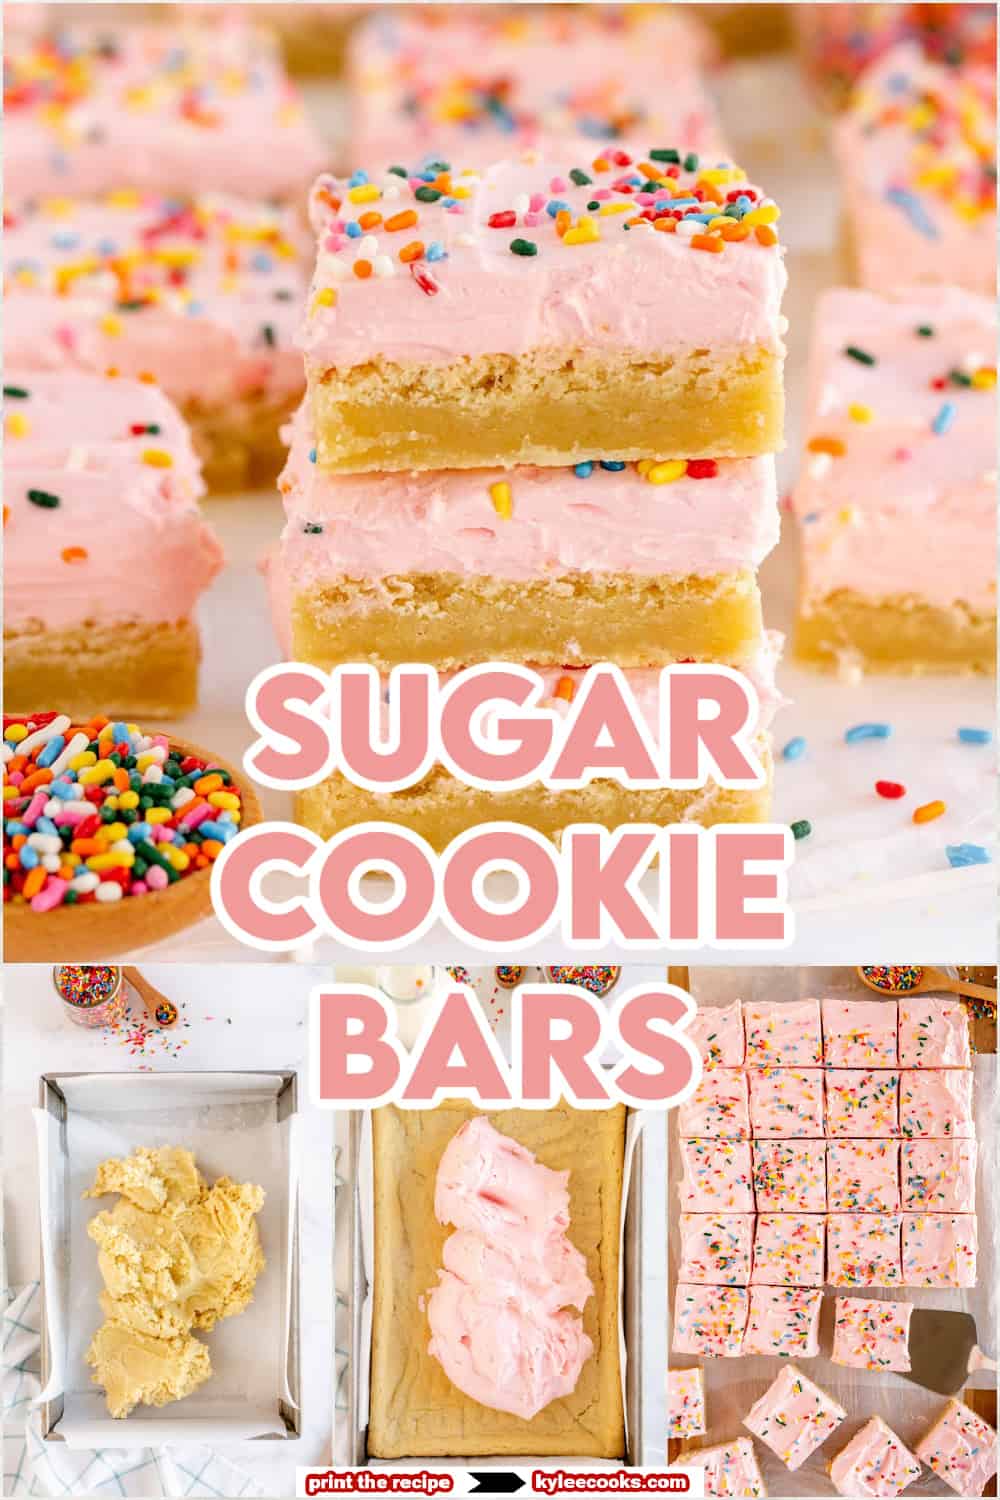 sugar cookie bars with recipe name overlaid in text.